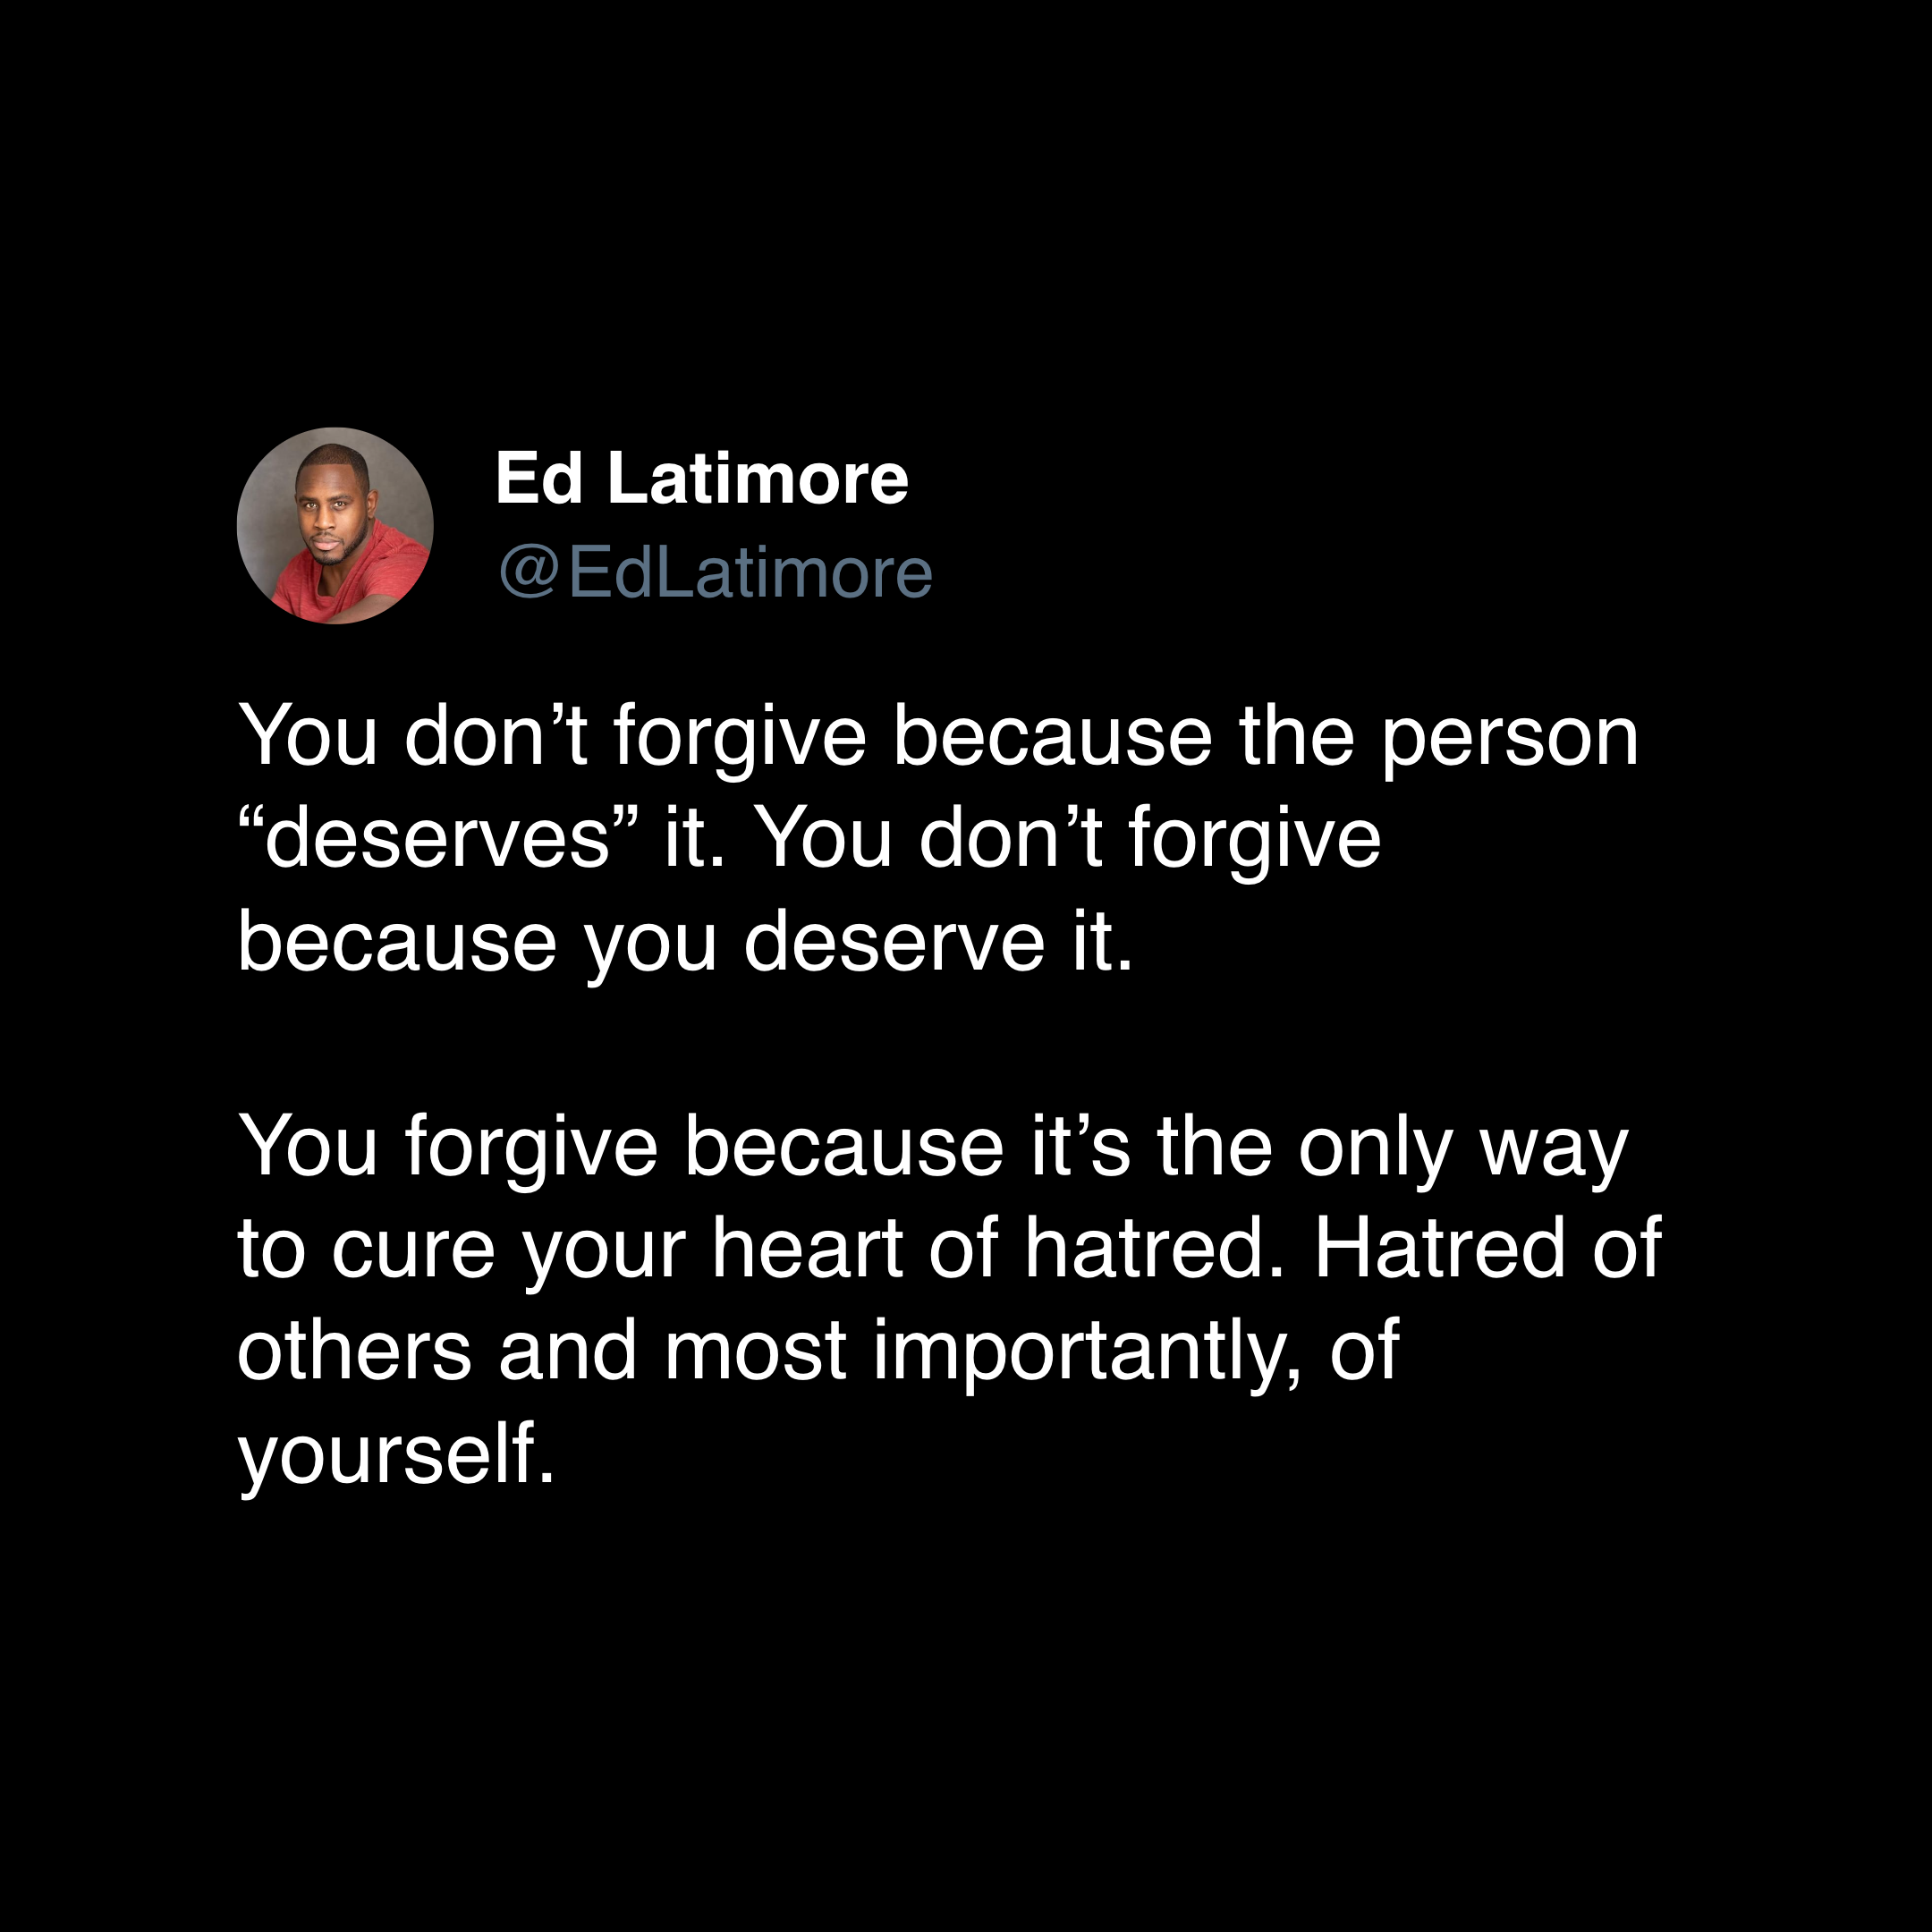 ed latimore forgiveness quotes "forgive to cure your heart of hatred"